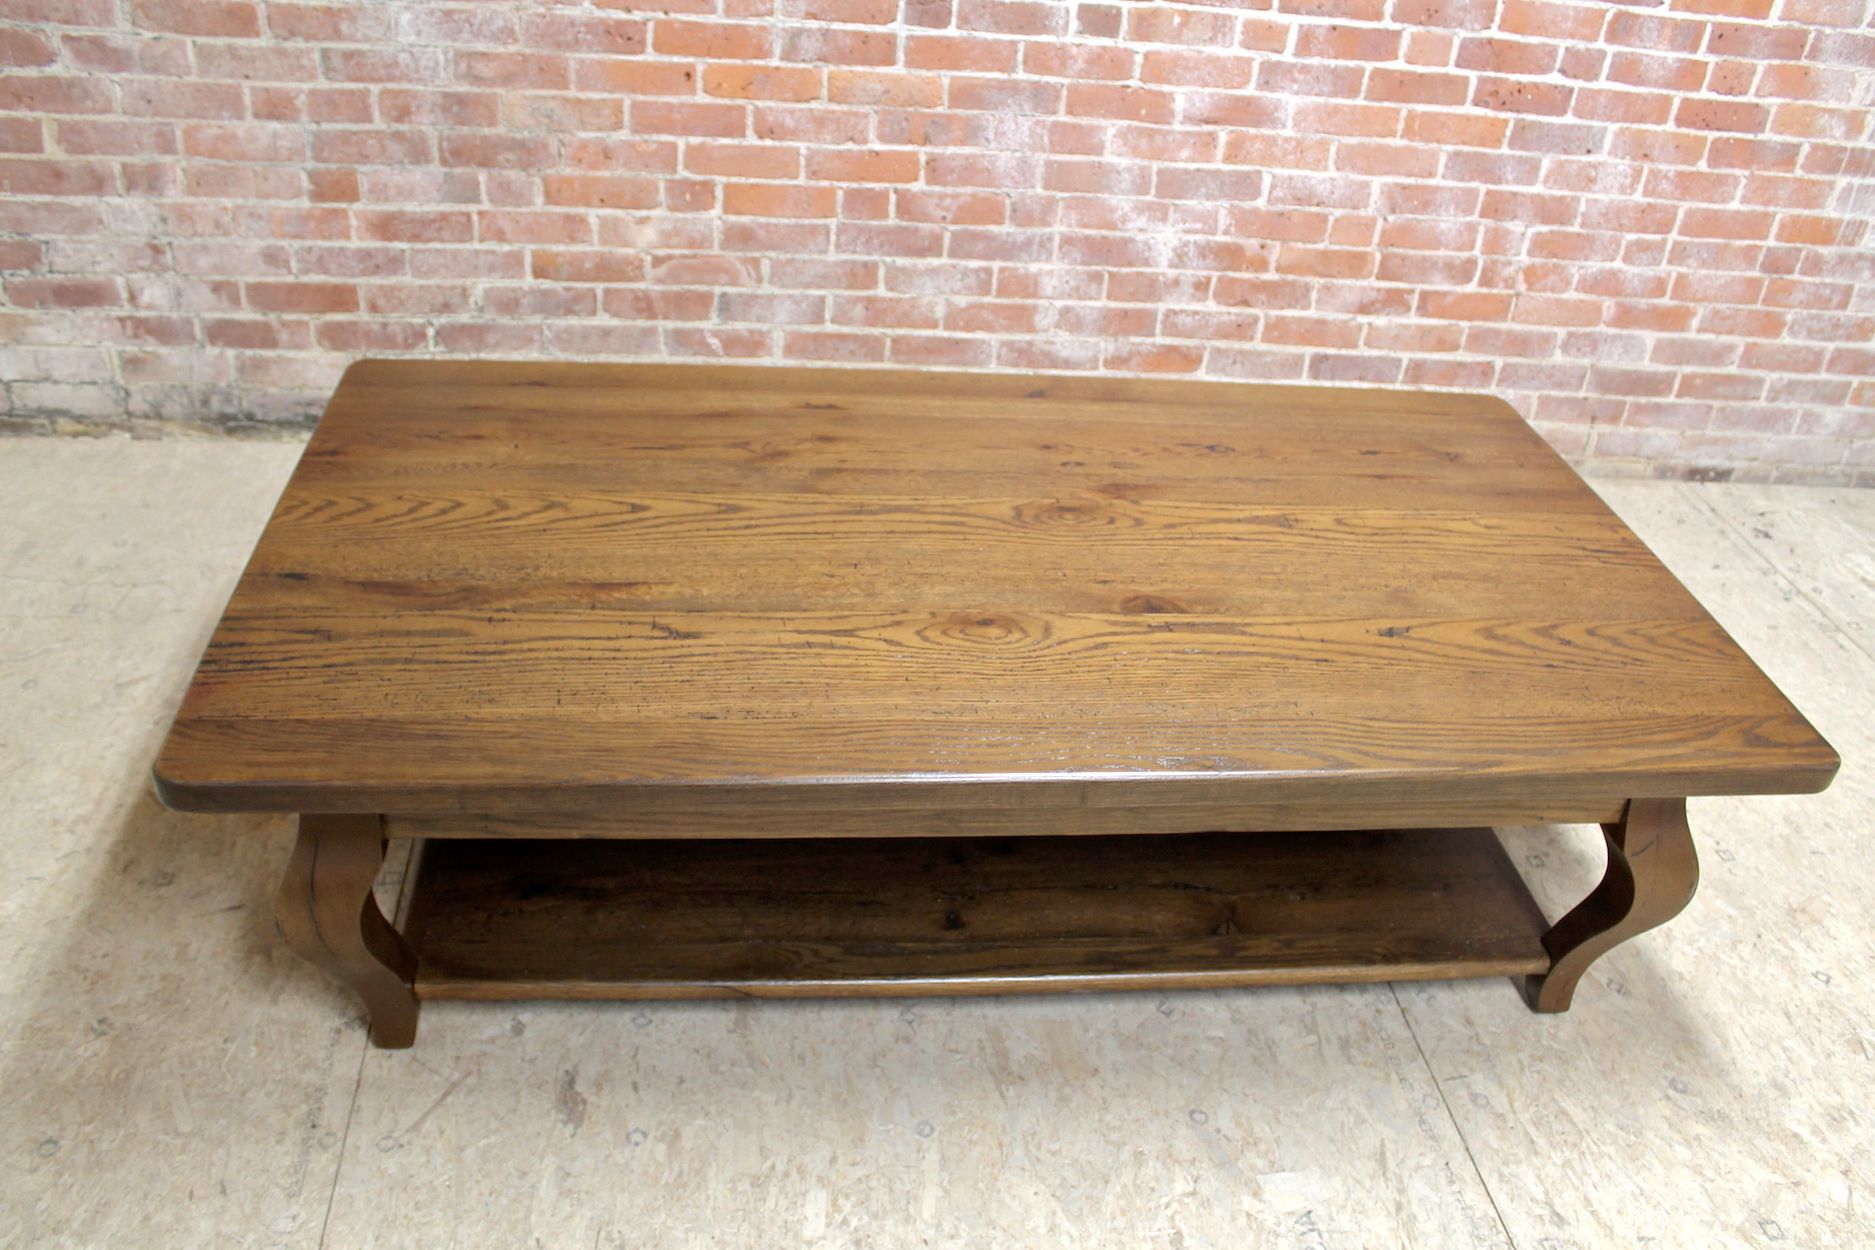 Widely Used Vintage Gray Oak Coffee Tables Intended For 66in Oak Coffee Table In Antique Walnut Finish (Gallery 4 of 20)